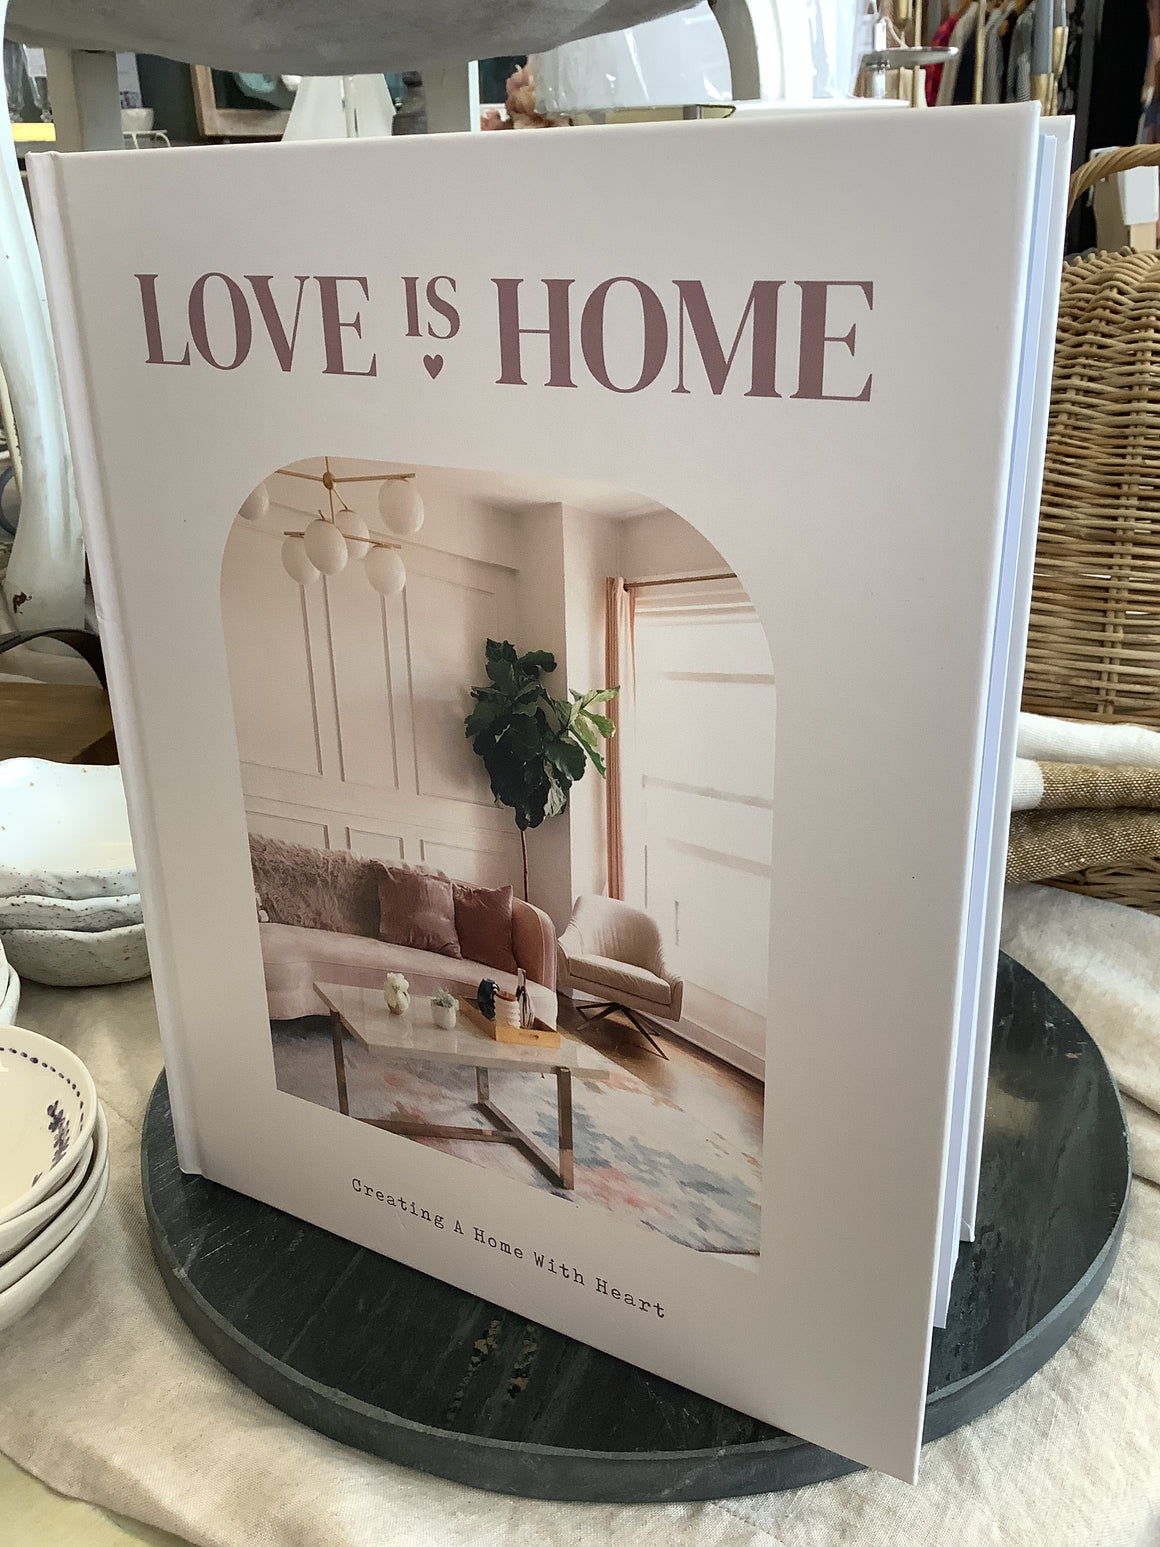 Love Is Home: Creating A Home with Heart